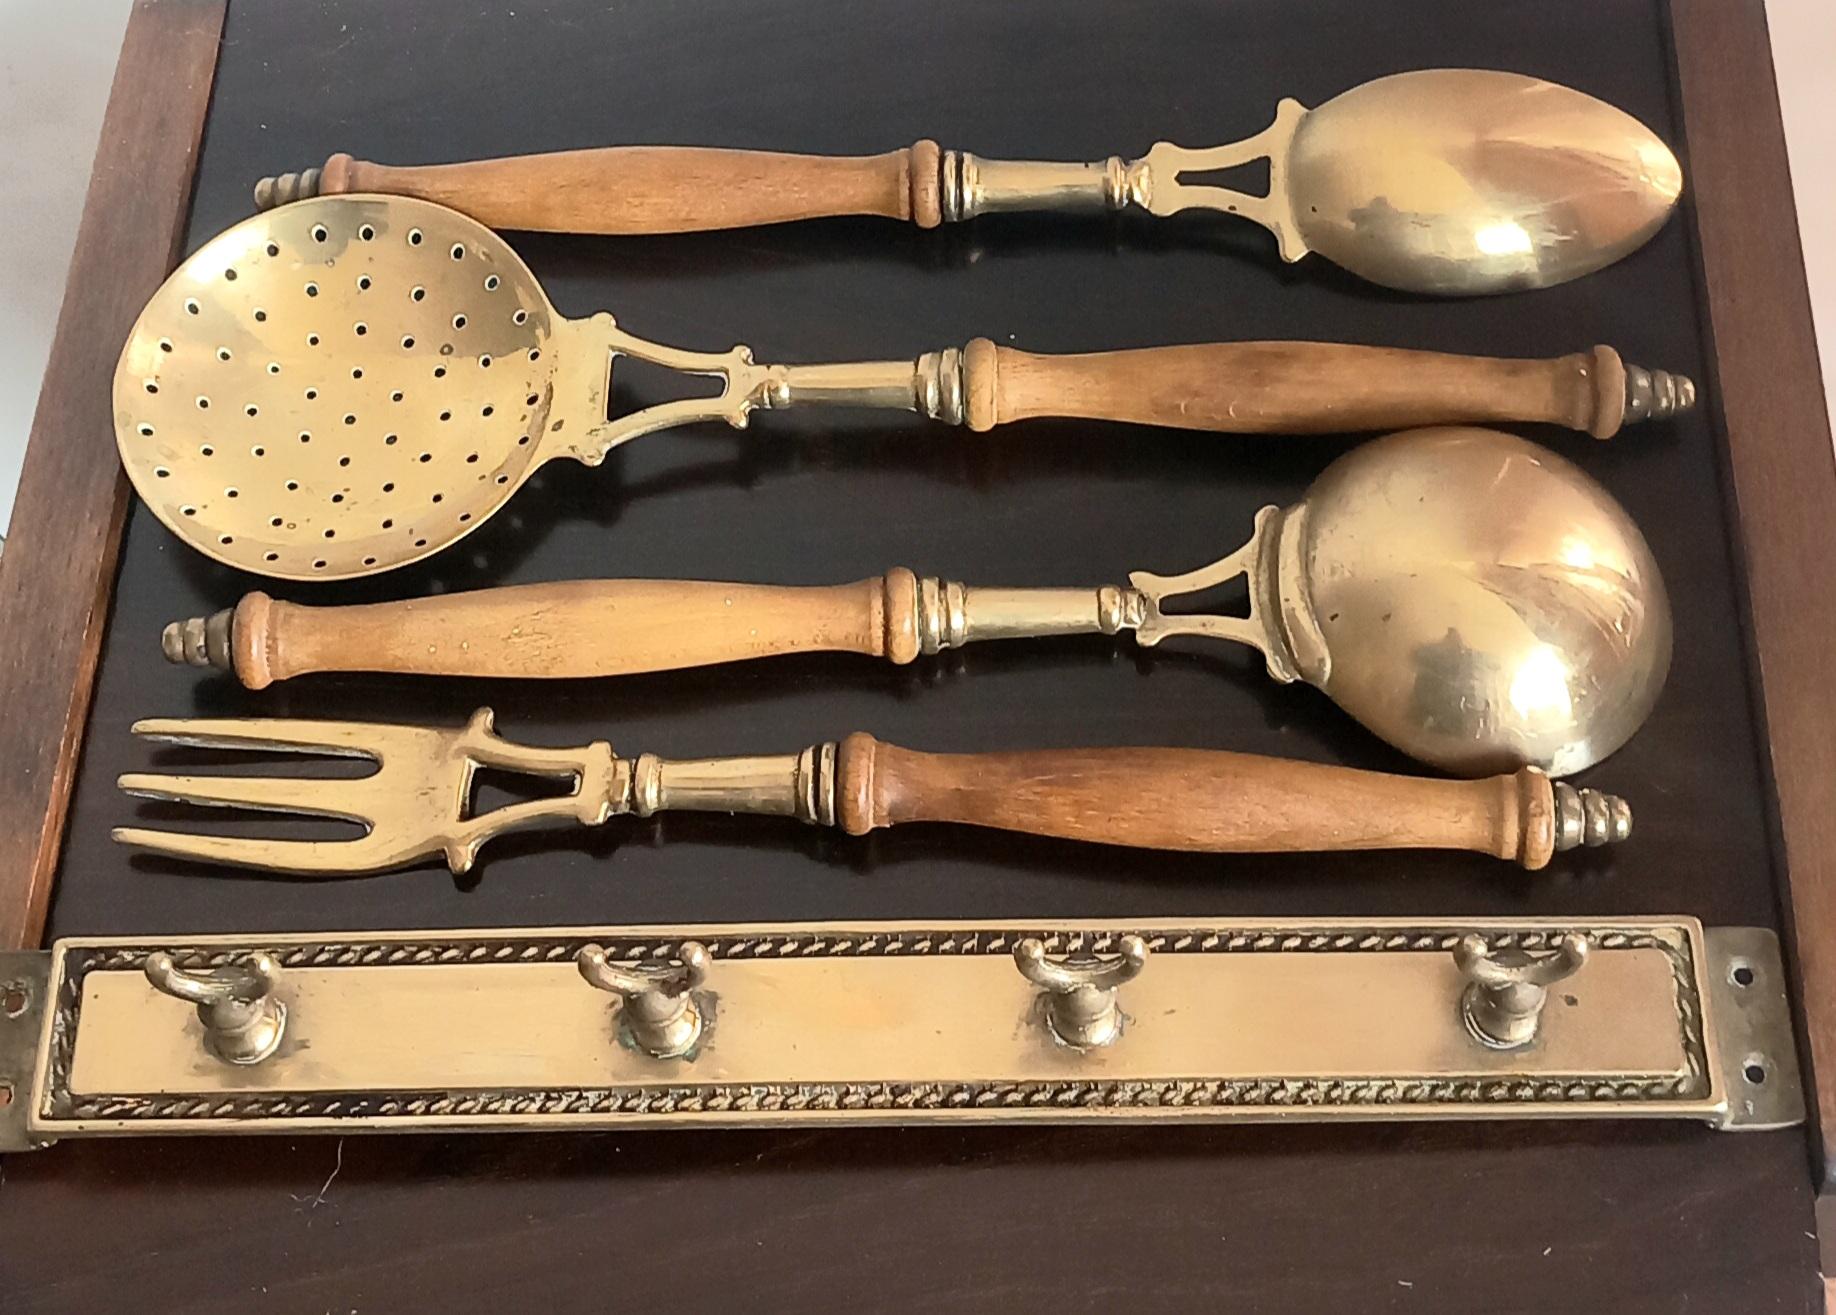 Old kitchen tools or utensils made of wood and brass hanging from a hanging bar. Old kitchen appliance  Midcentury  or Early

Saucepan fork palette and serving pot

This set of brass utensils is ideal to decorate a kitchen of any style, because its